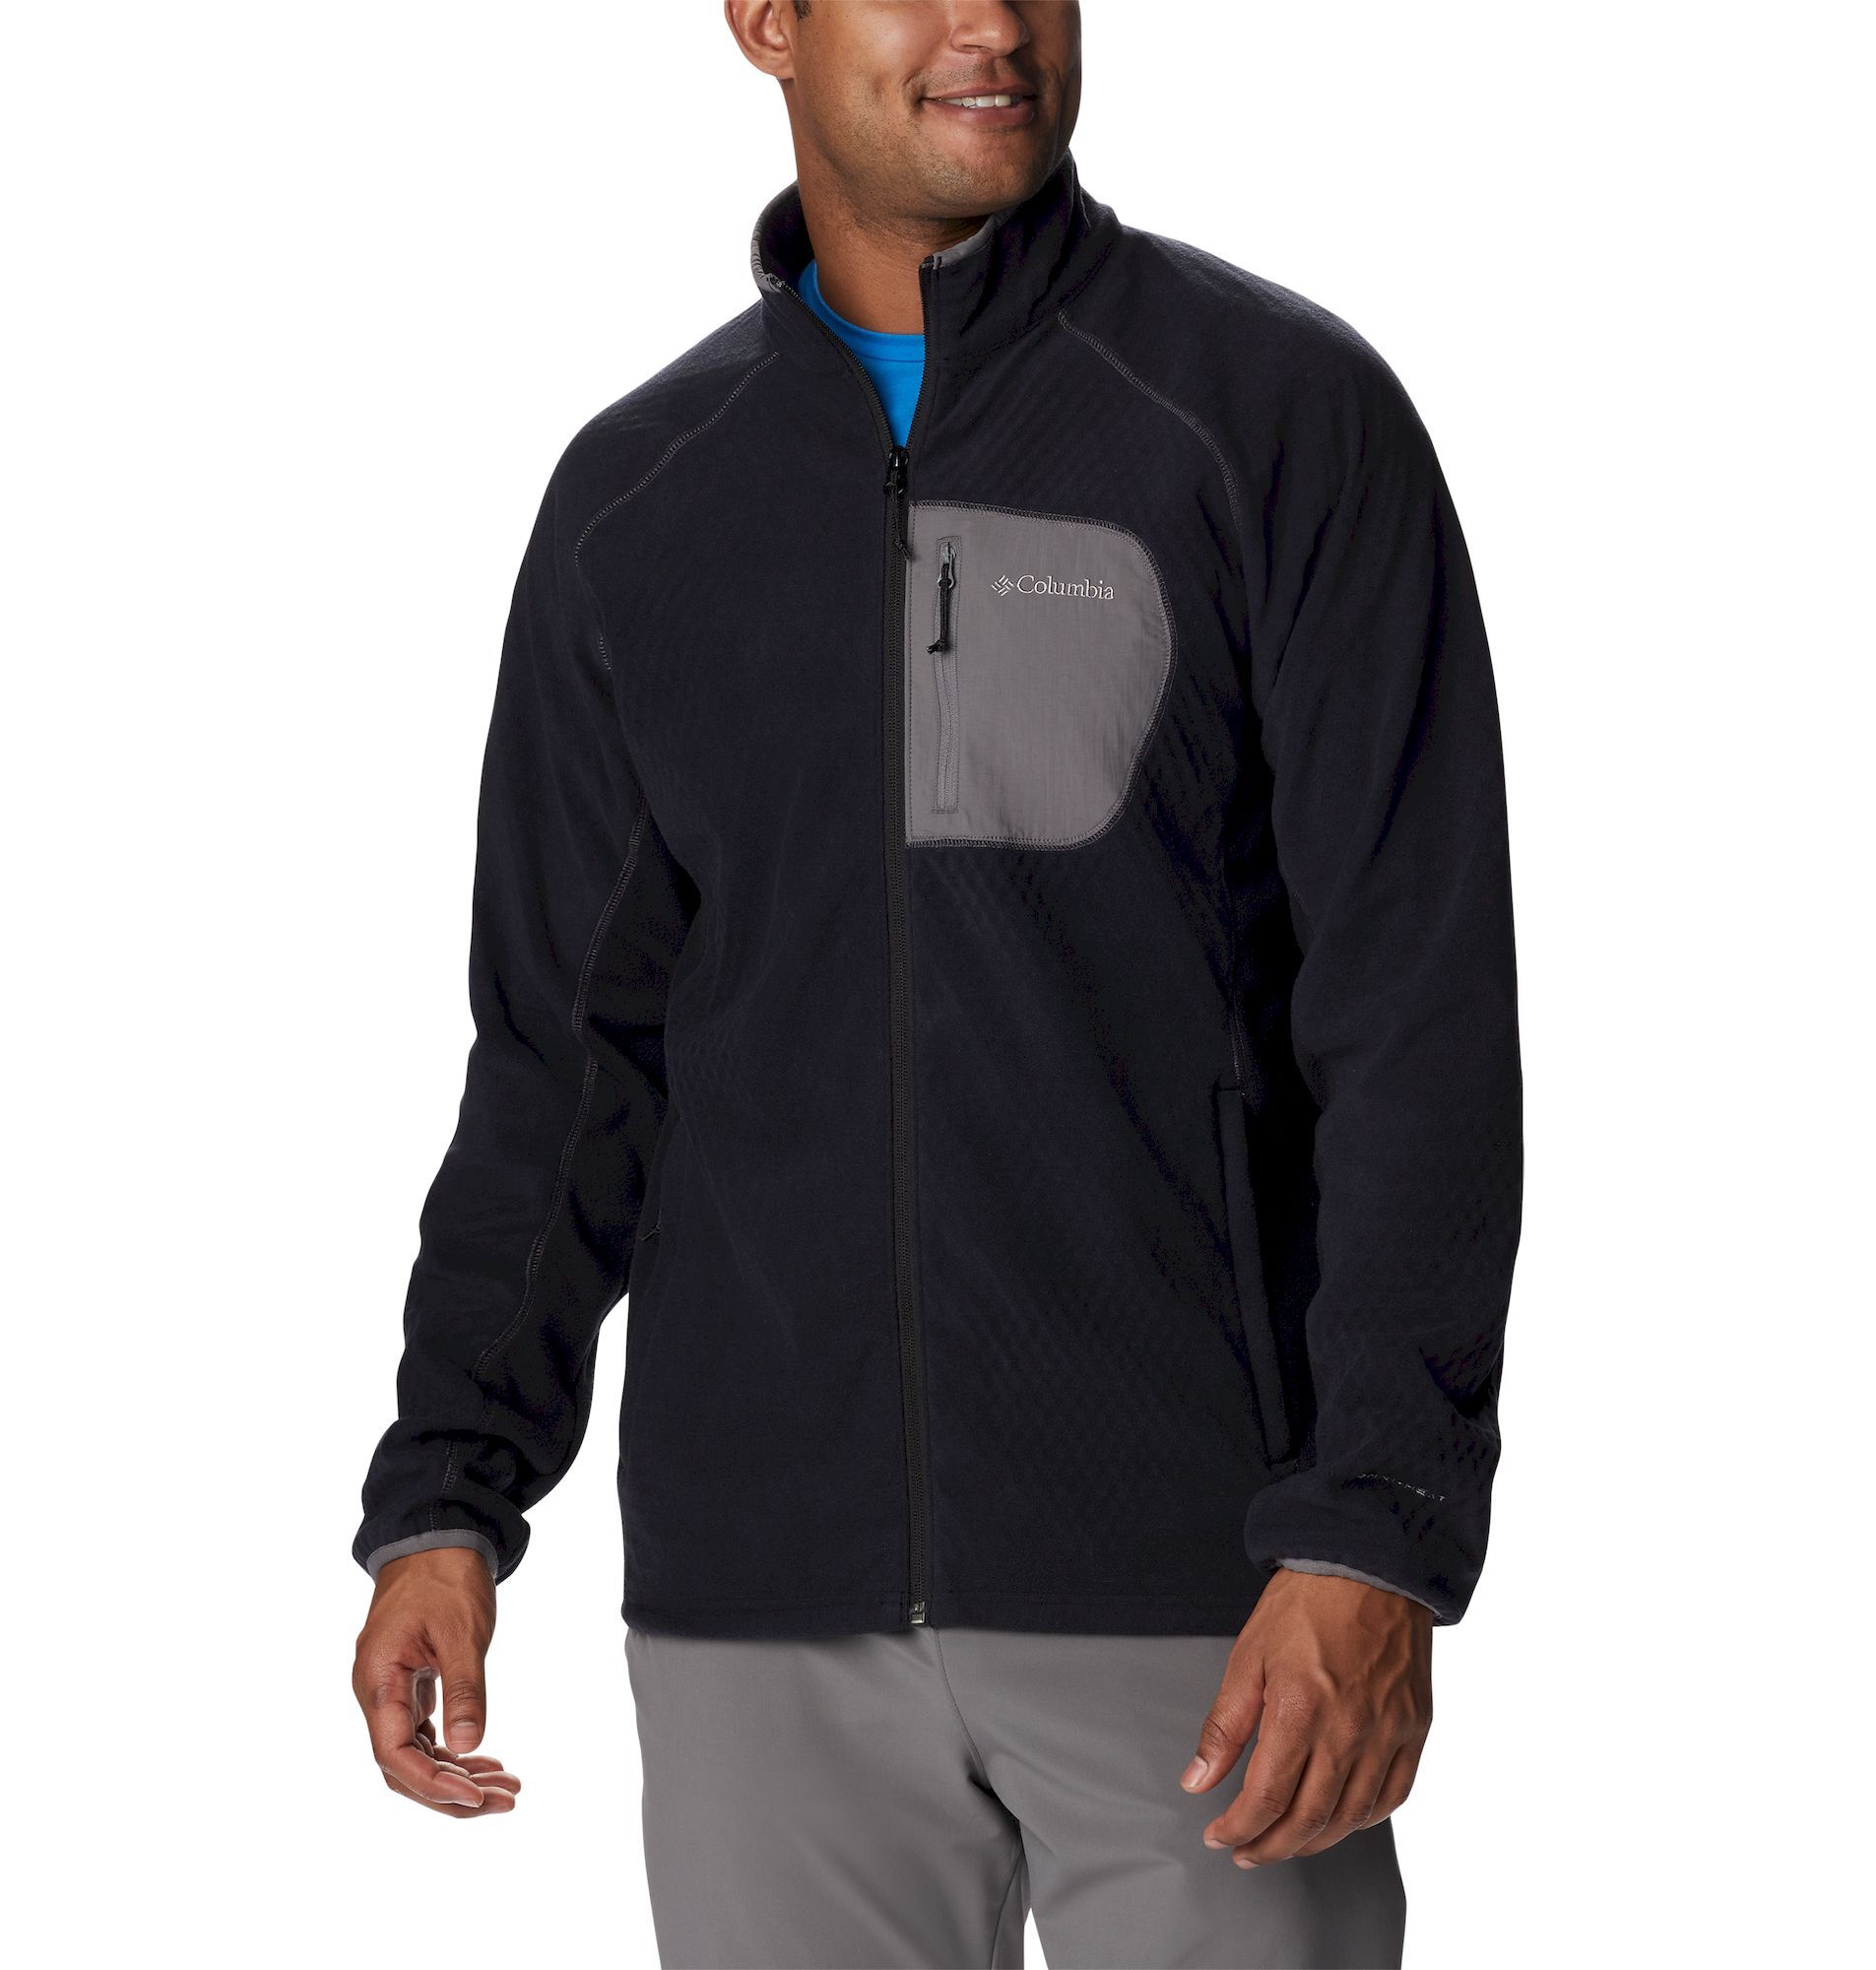 https://images.hardloop.fr/376621/columbia-outdoor-tracks-full-zip-polaire-homme.jpg?w=auto&h=auto&q=80